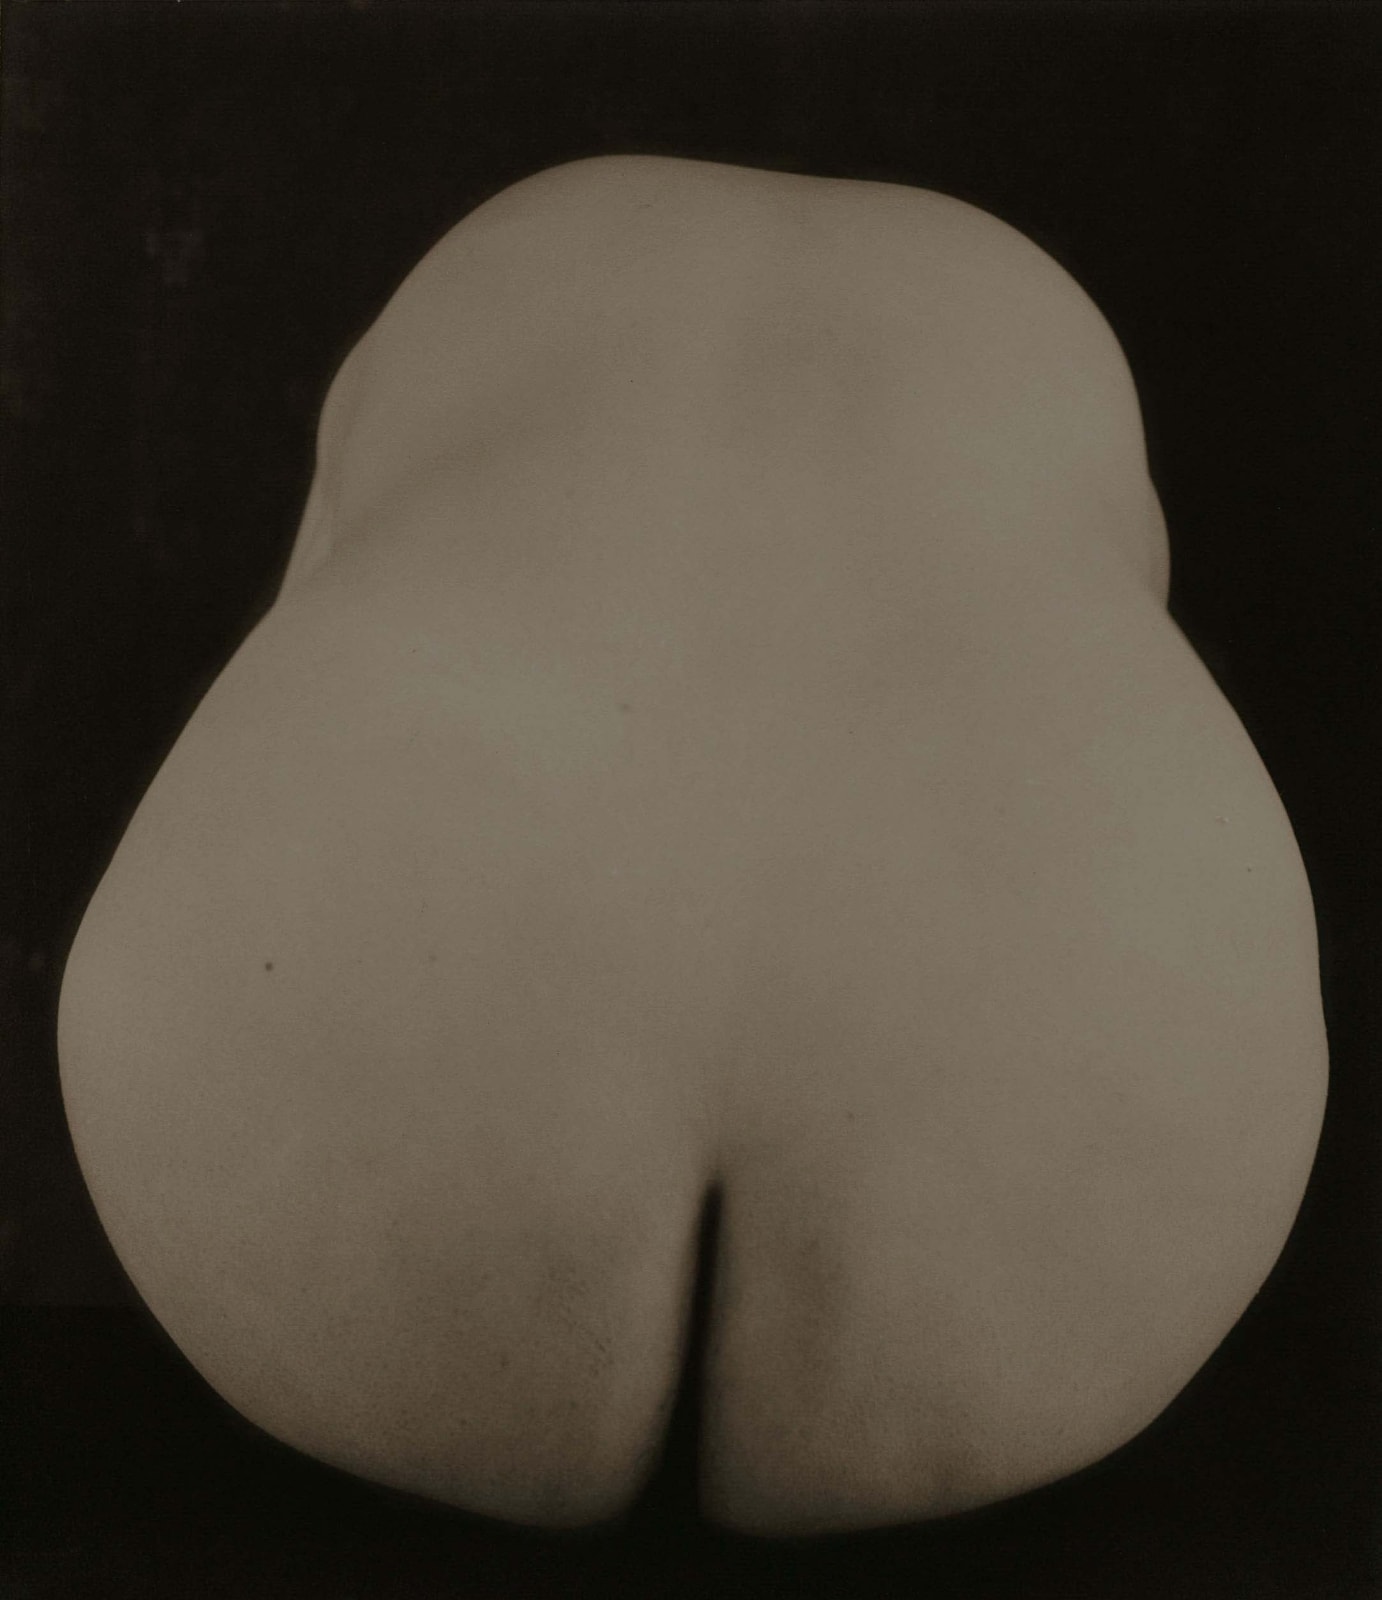 Edward Weston's portrait of Anita Brenner nude resembling the shape of a pear 